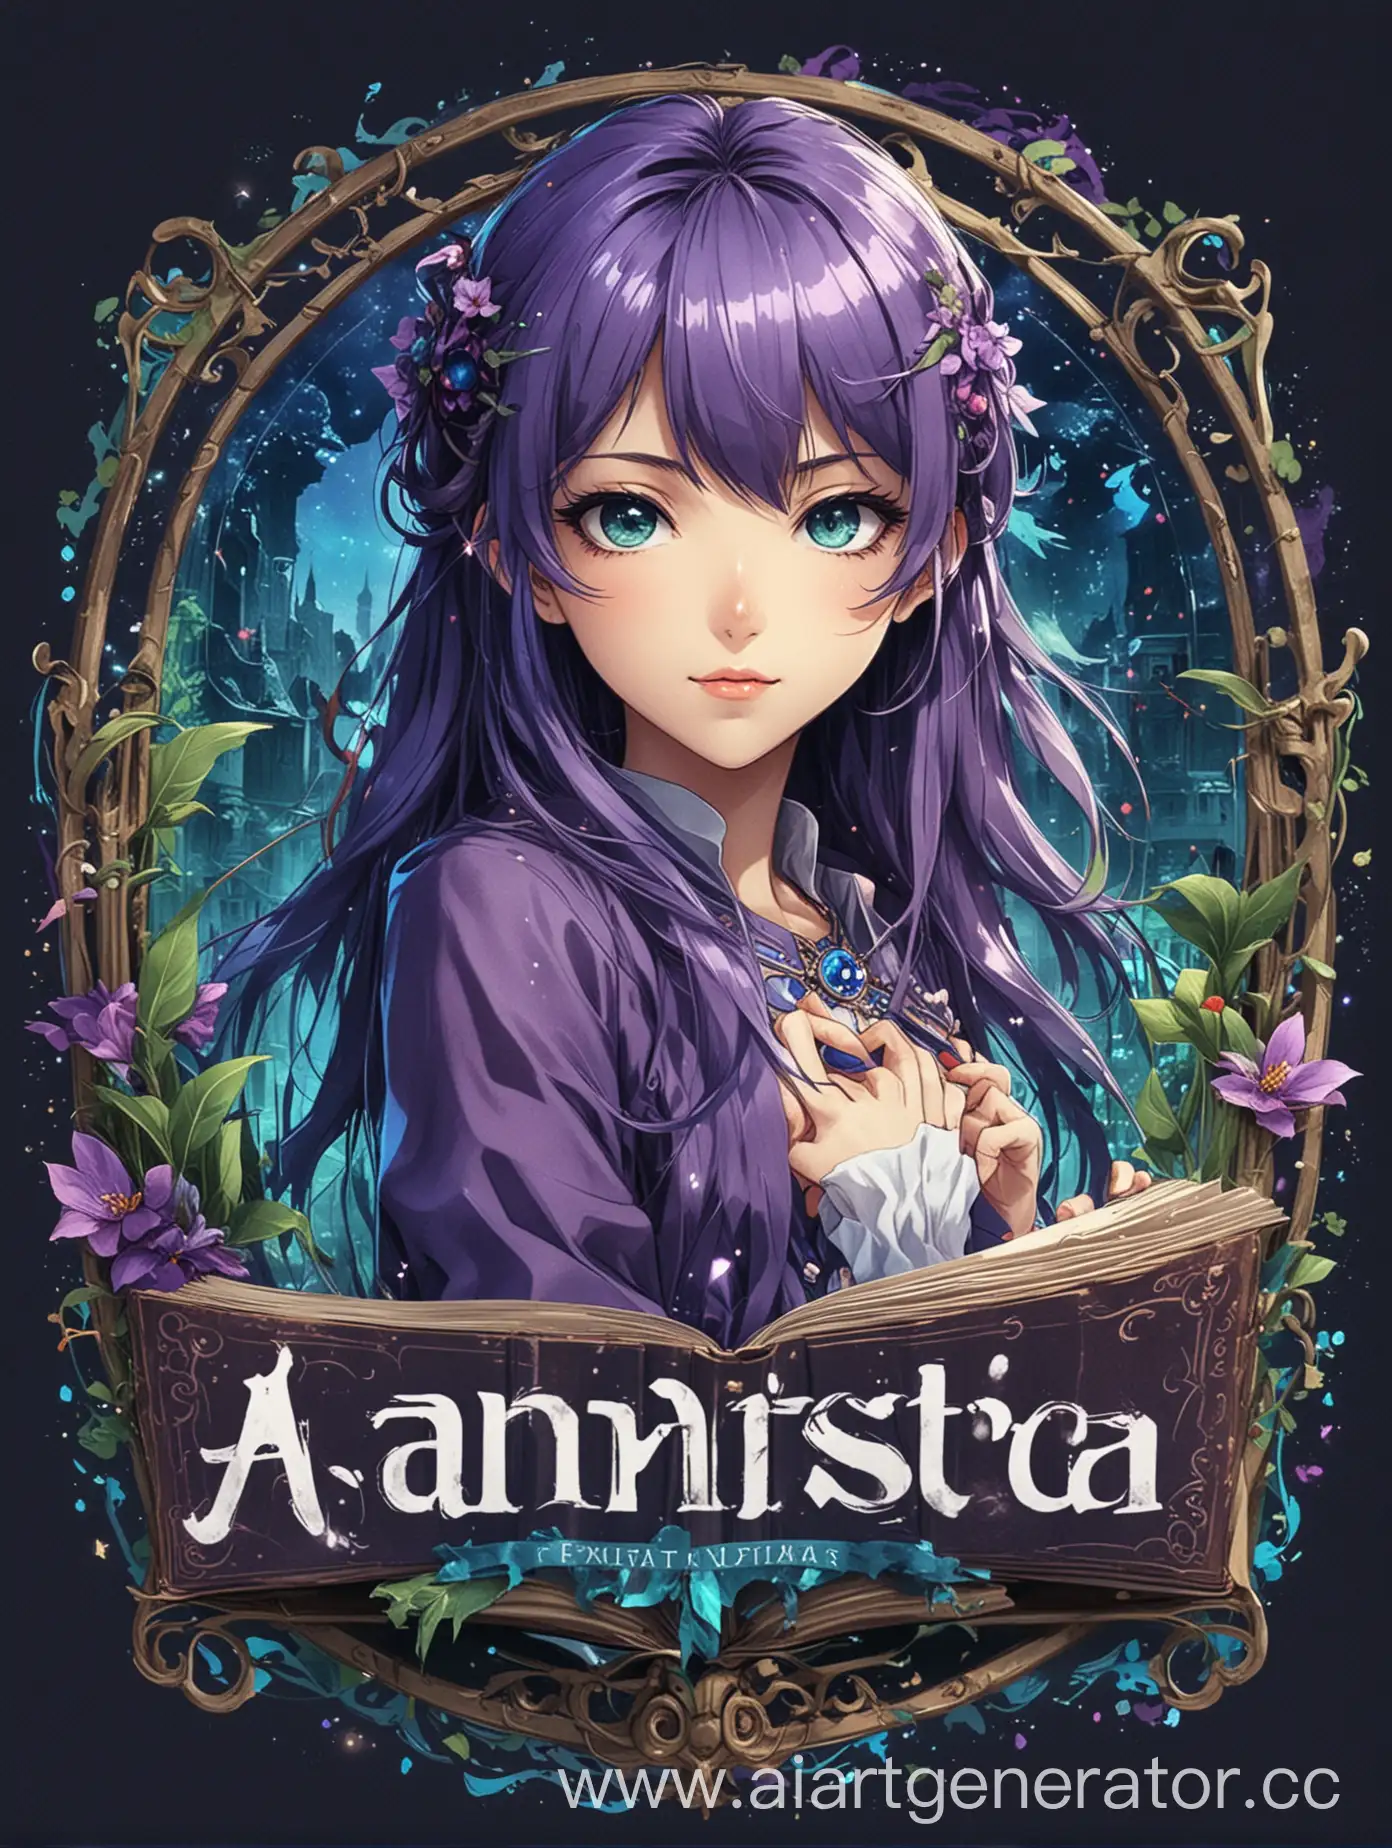 Anime-Fantastica-Enchanting-Channel-Logo-with-Magical-Fantasy-Theme